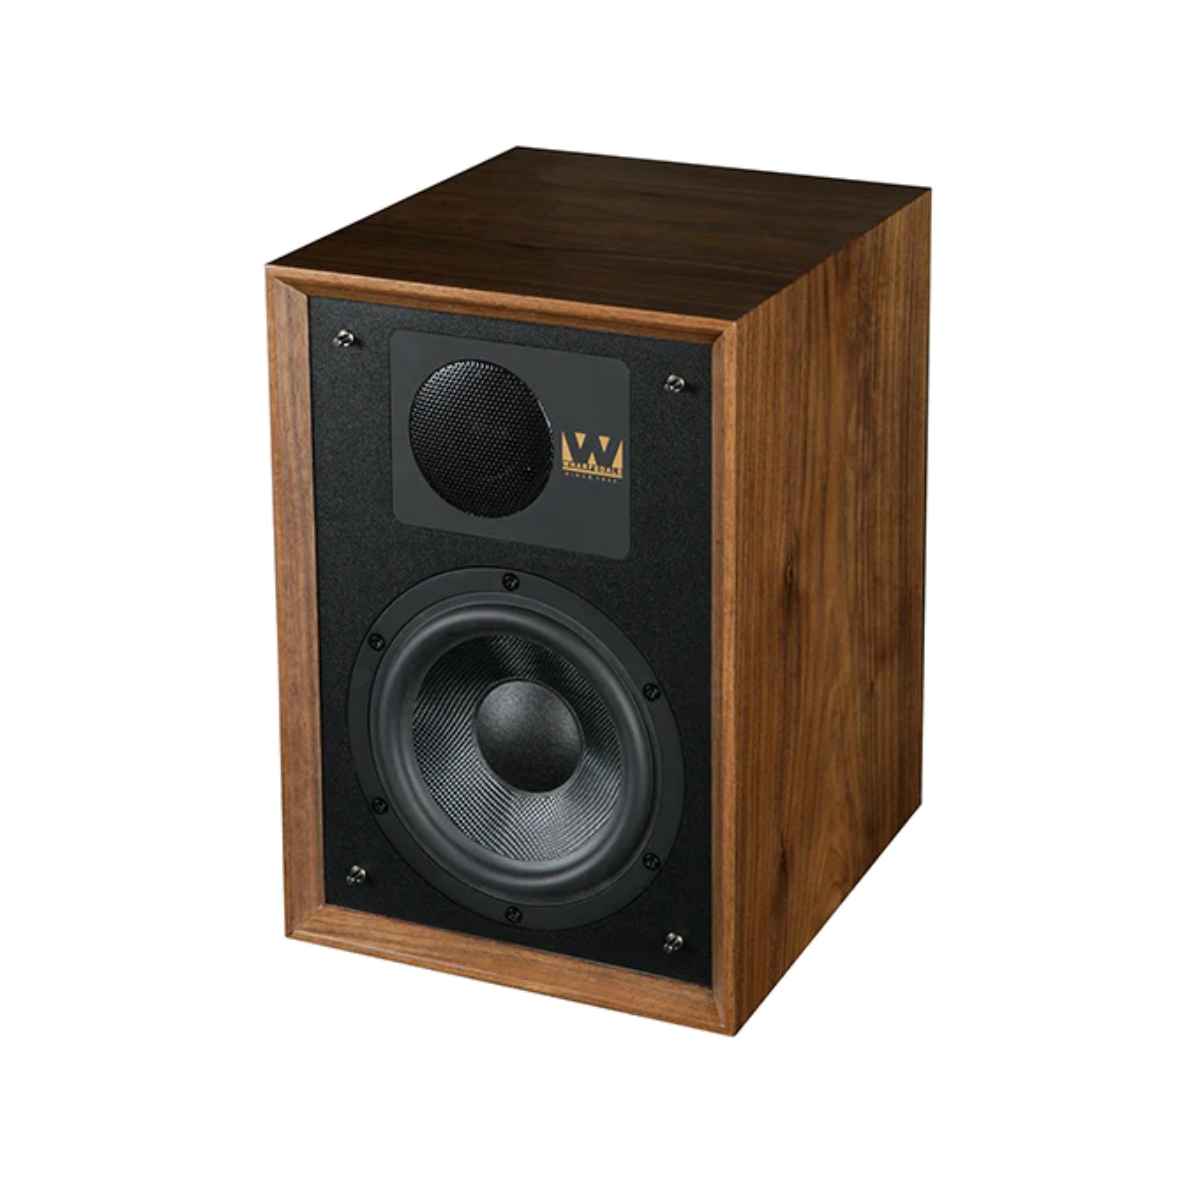 Denton 85th Anniversary is a two-way speaker in the classic bookshelf tradition, beautifully hand veneered in Mahogany by Wharfedale cabinet makers with an inset front baffle and traditional Tungsten cloth grille. Underneath the traditional exterior, however, the Denton 85th Anniversary is bang up to date and utilises a mixture of traditional and advanced technology.